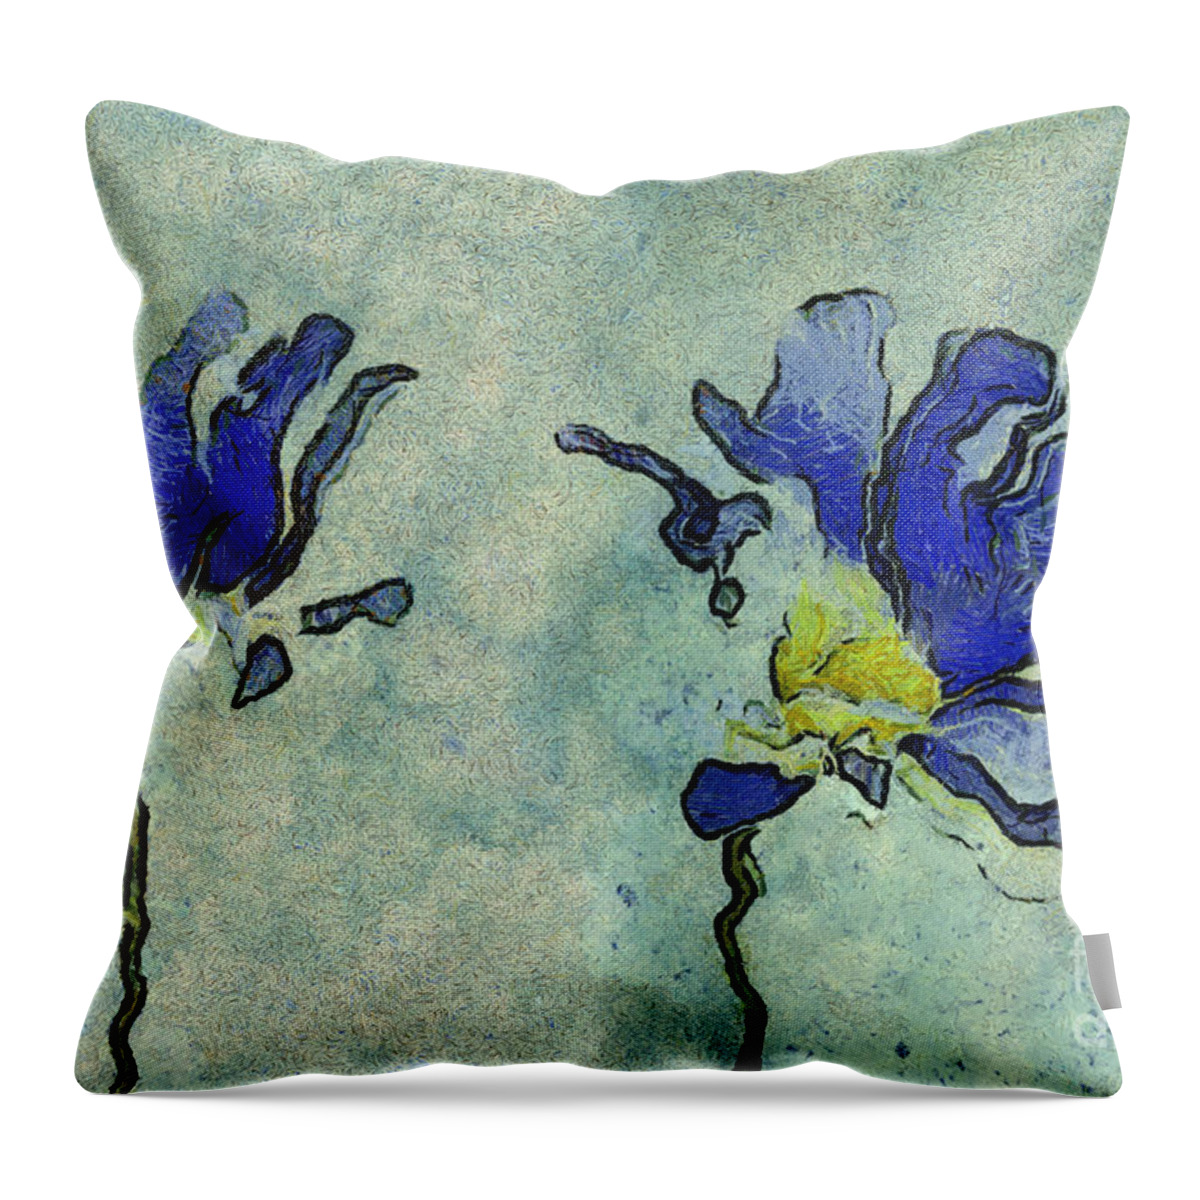 Daisies Throw Pillow featuring the digital art Duo Daisies - 02dp3b22 by Variance Collections